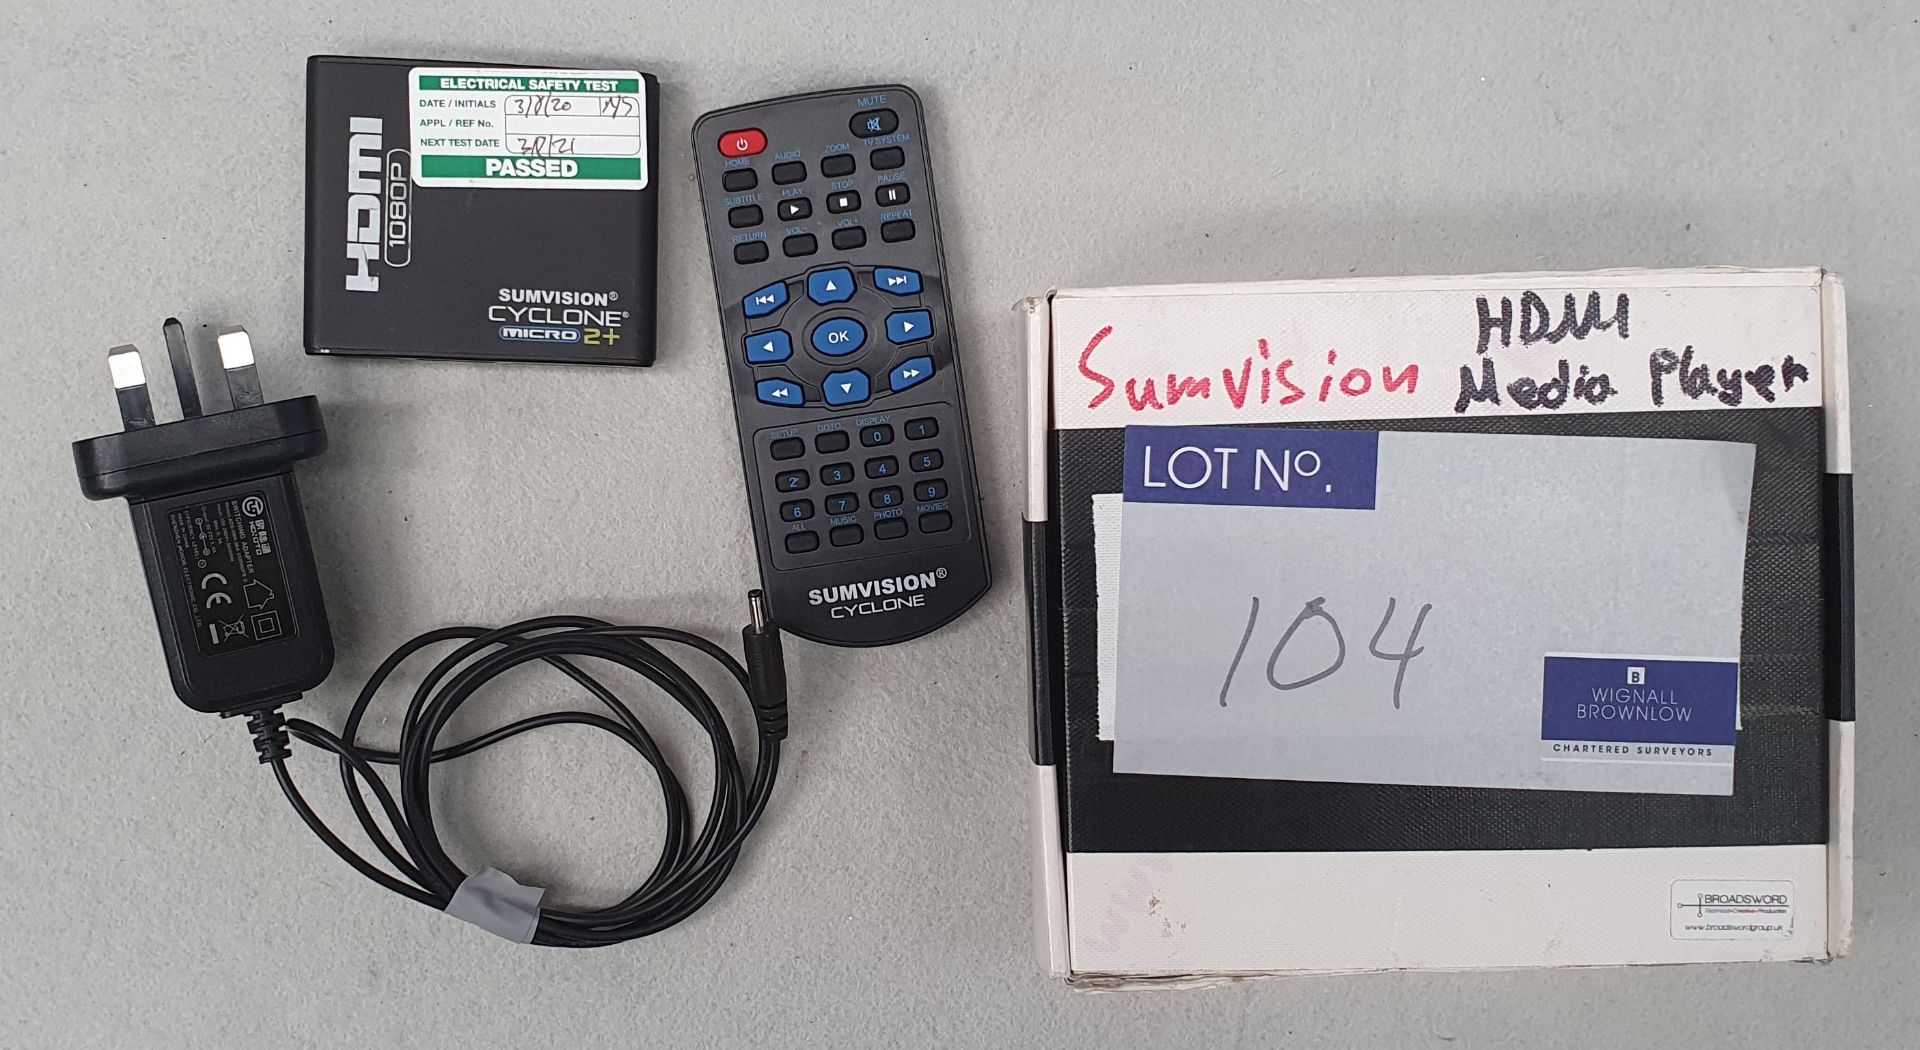 A Sumvision Cyclone Micro 2+ USB Media Player, HDMI Out with remote and psu (tested and working).